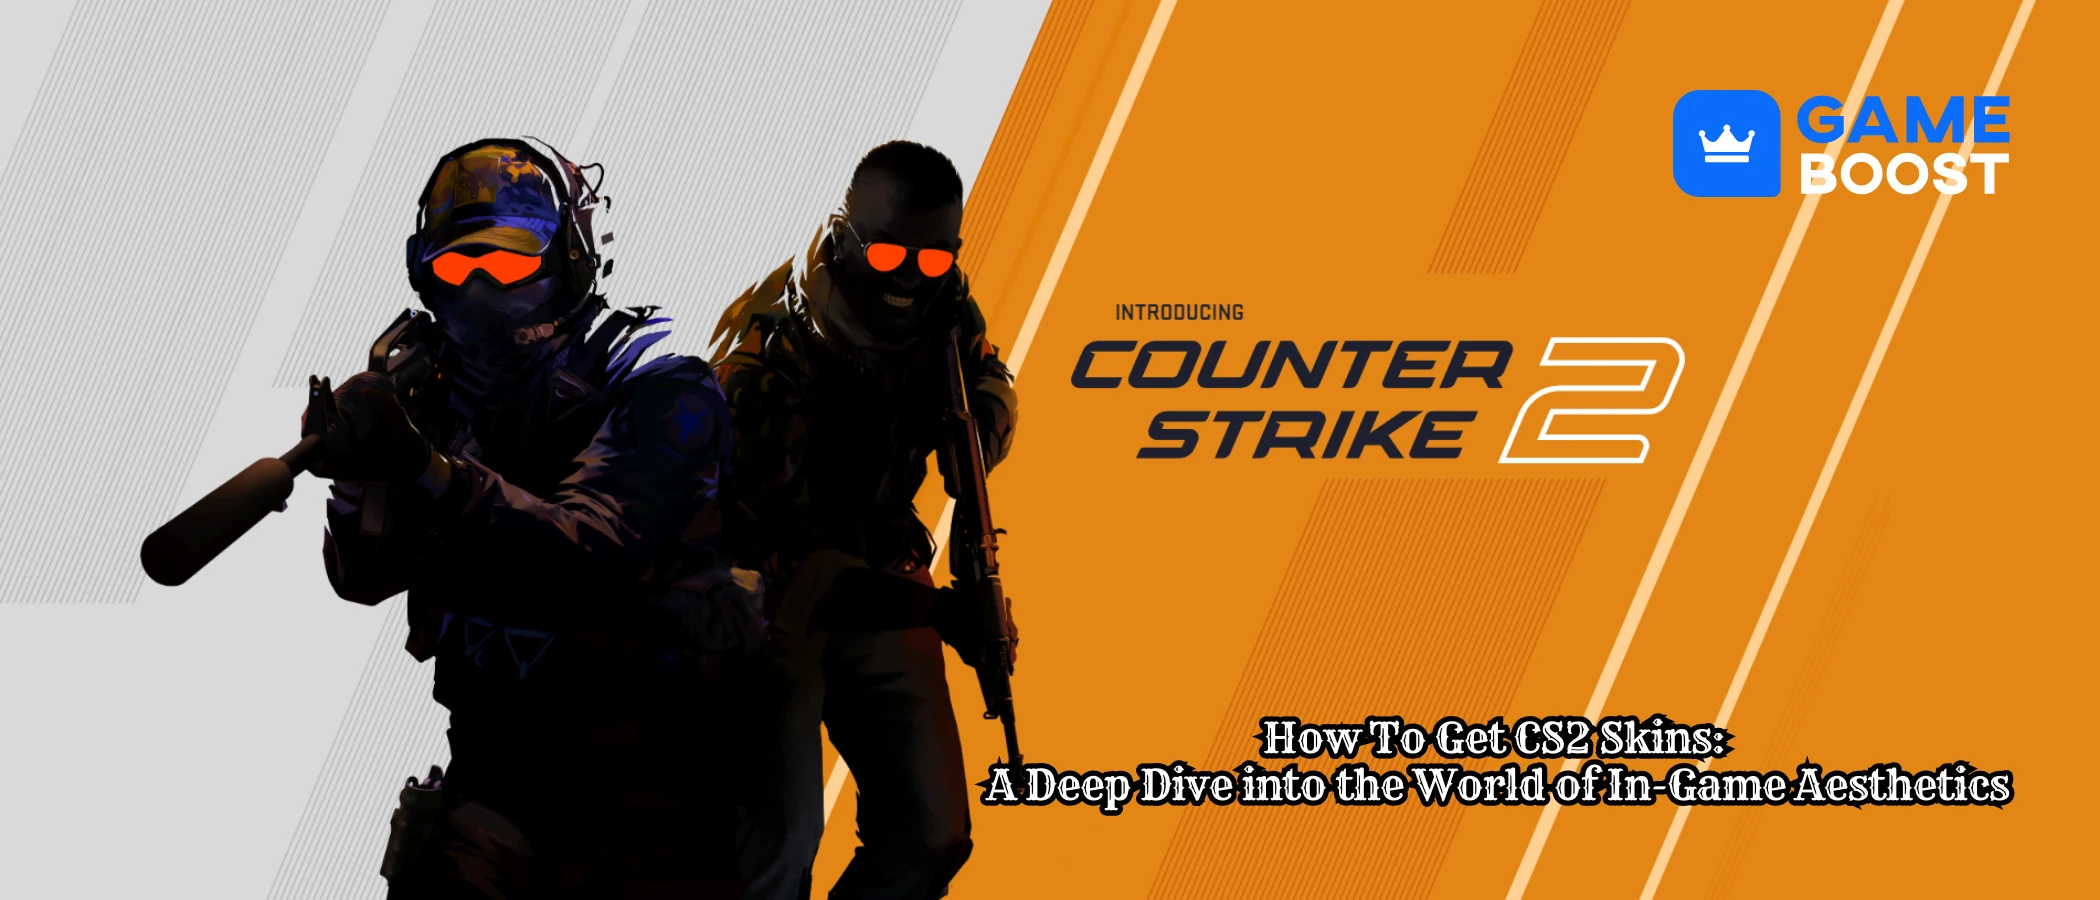 countrer strike 2 image, blog title on how to get cs2 skins and gameboost logo